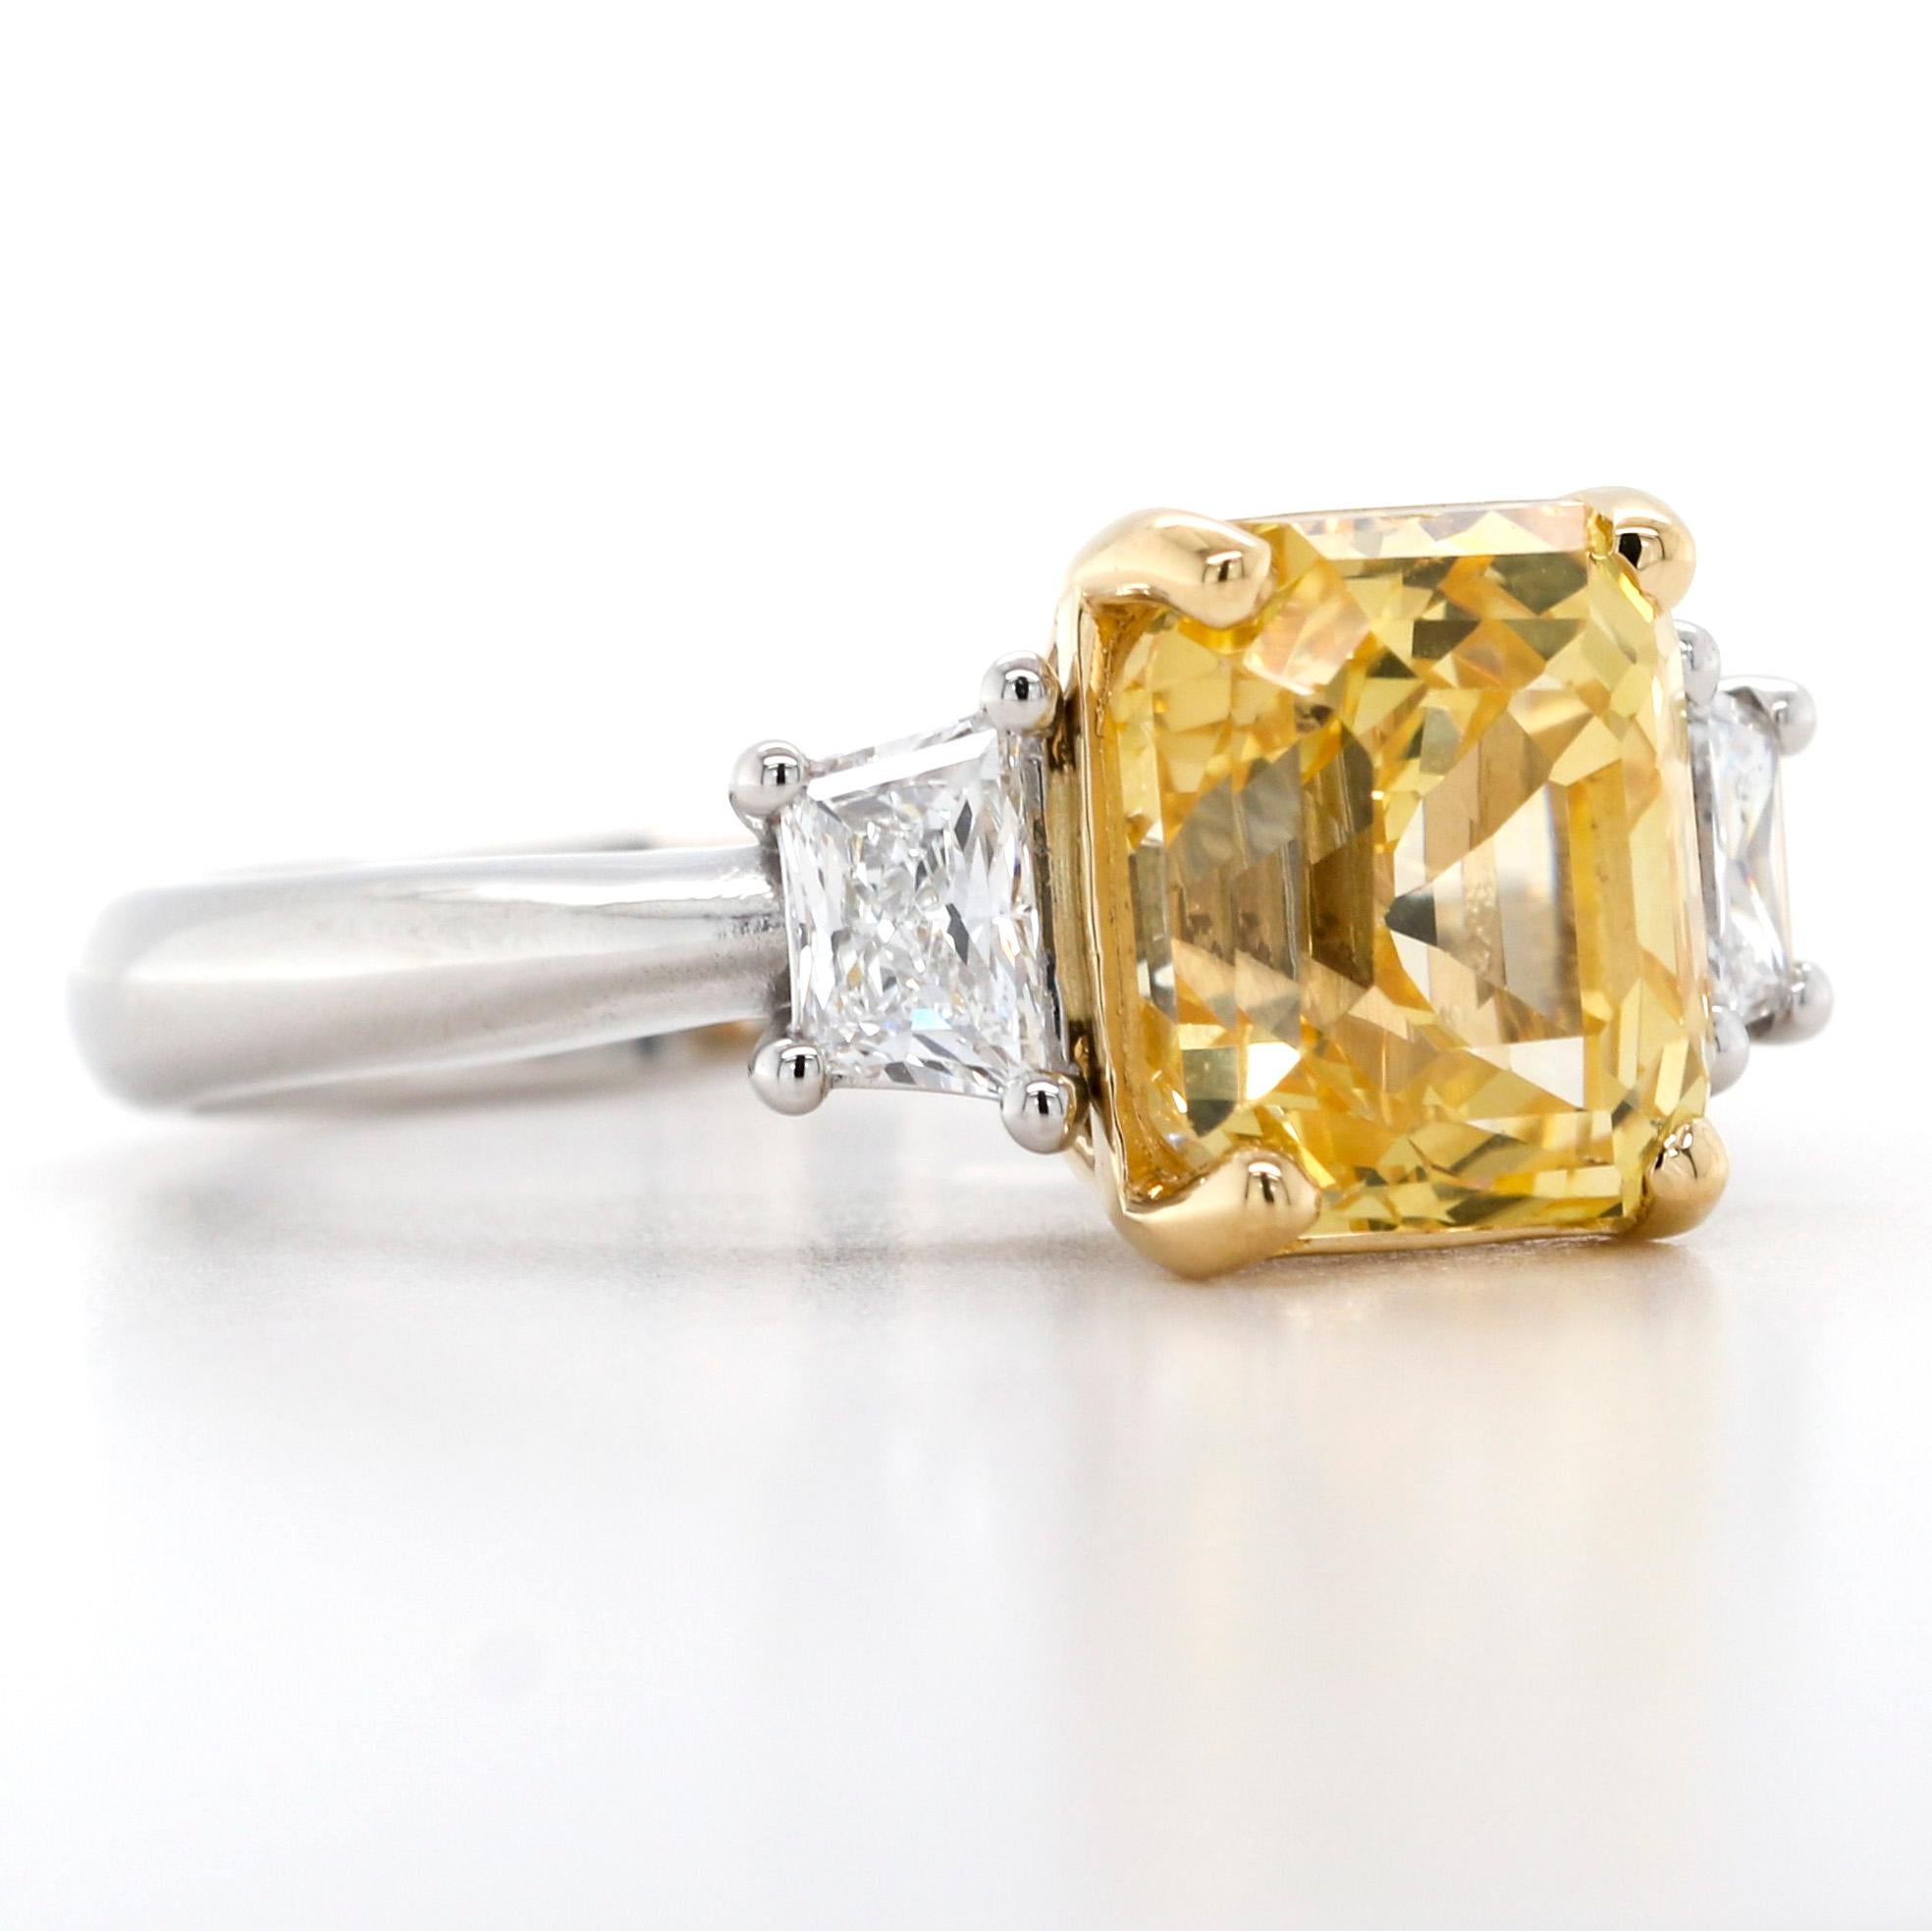 Stunning women's yellow sapphire and diamond ring crafted in platinum and 18-karat white gold. This beautiful ring features a 5.59-carat octagonal step-cut natural unheated yellow sapphire with a trapeze diamond on the sides--polished metal